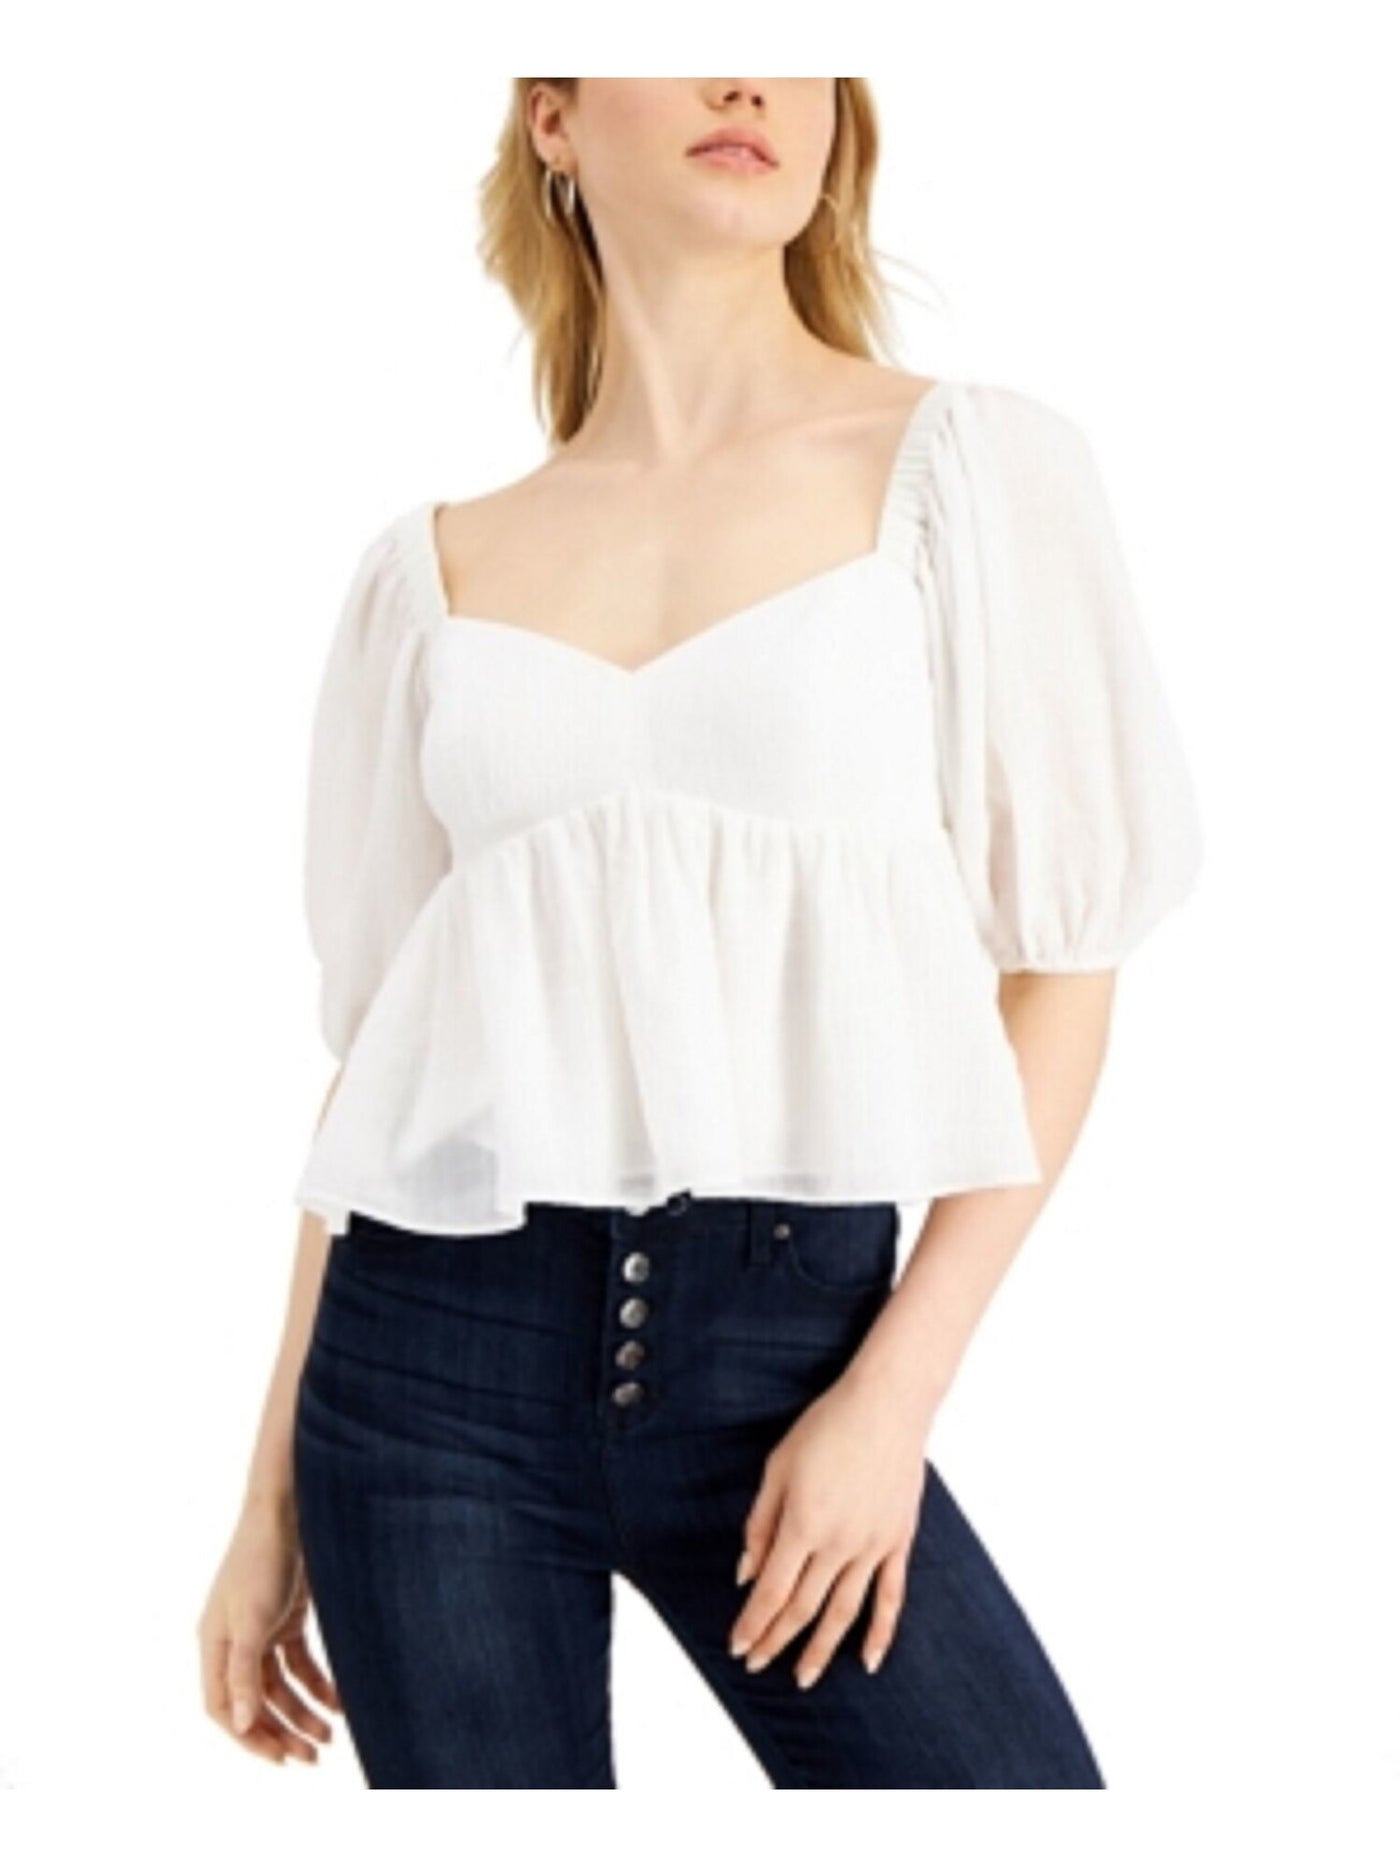 LEYDEN Womens White Sheer Lined Elbow Sleeve Sweetheart Neckline Top XL